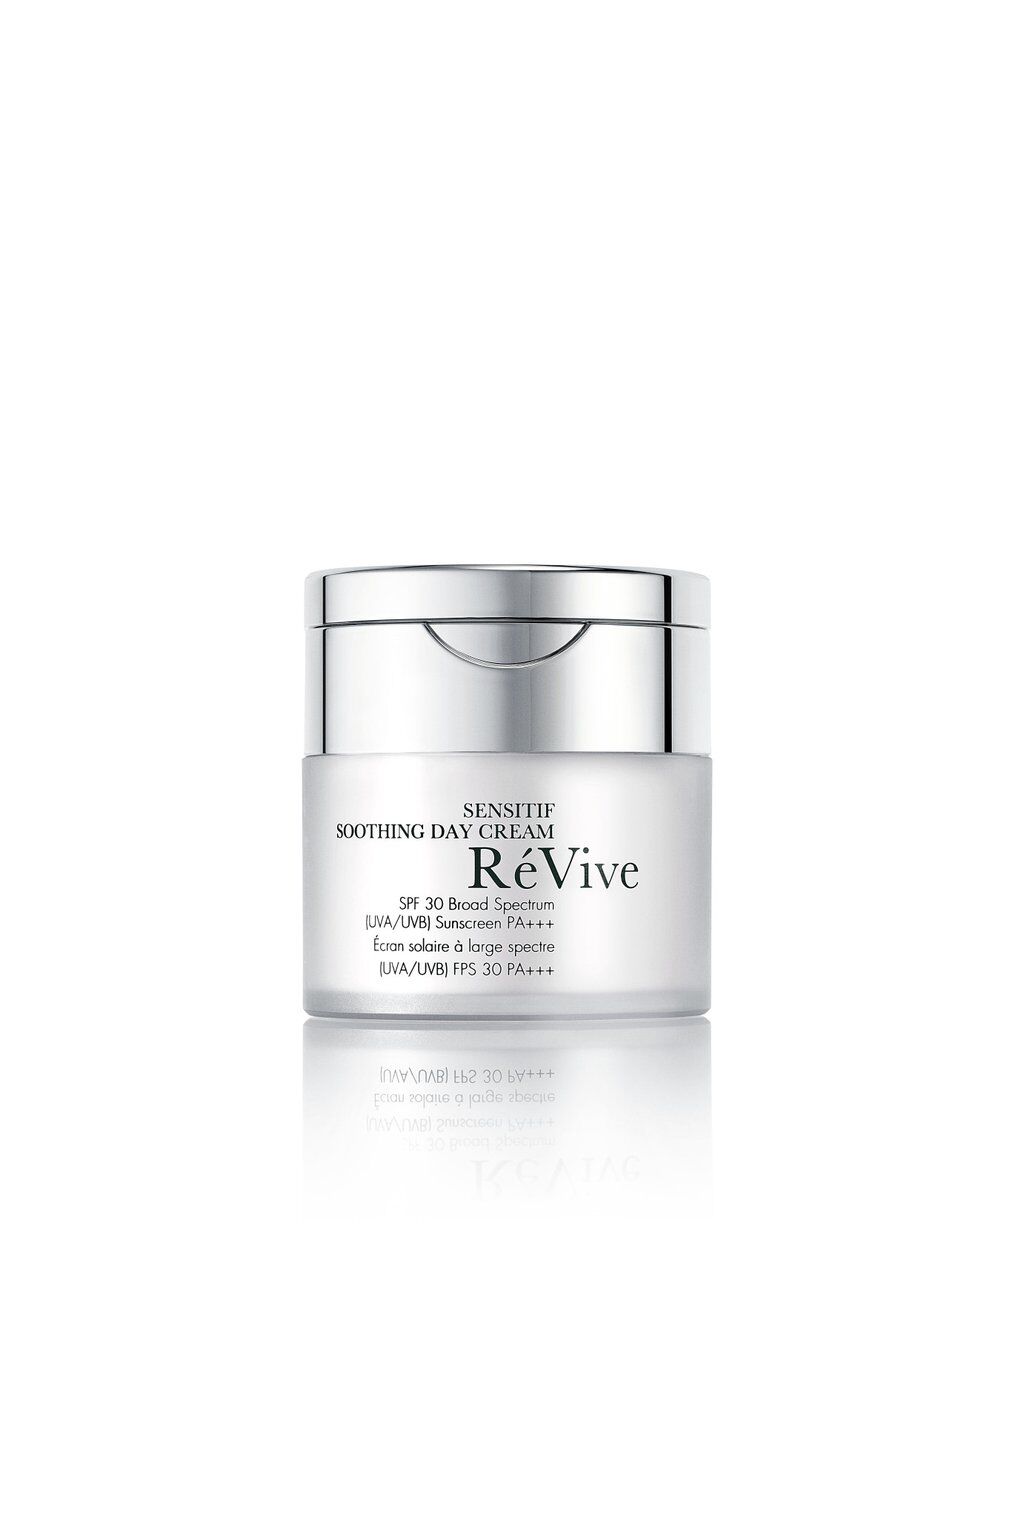 RéVive - Sensitif Soothing Day Cream SPF 30 Broad Spectrum Sunscreen PA +++